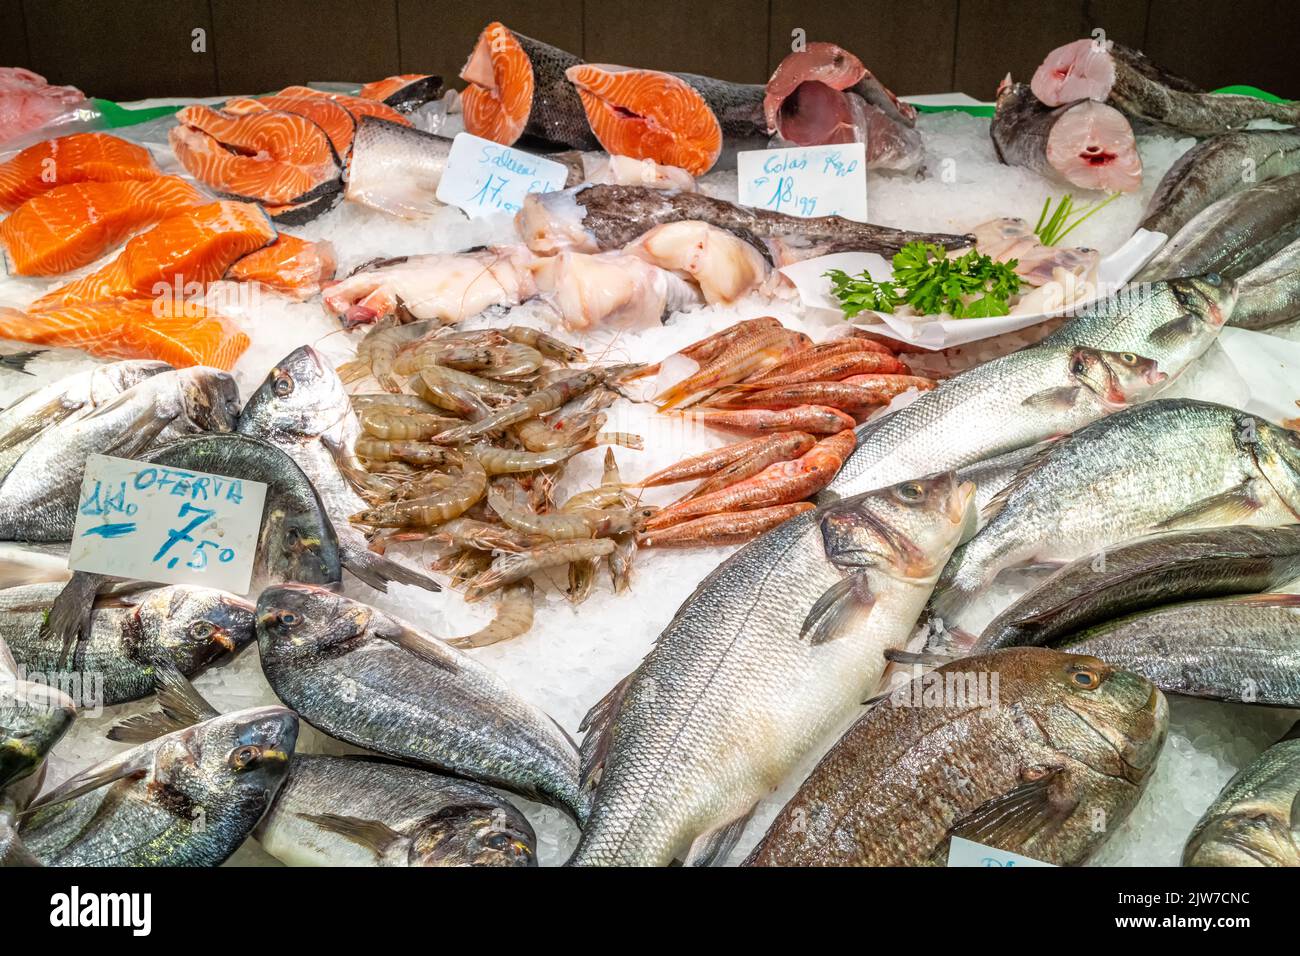 Fish and seafood on ice seen at a market in Barcelona, Spain Stock Photo